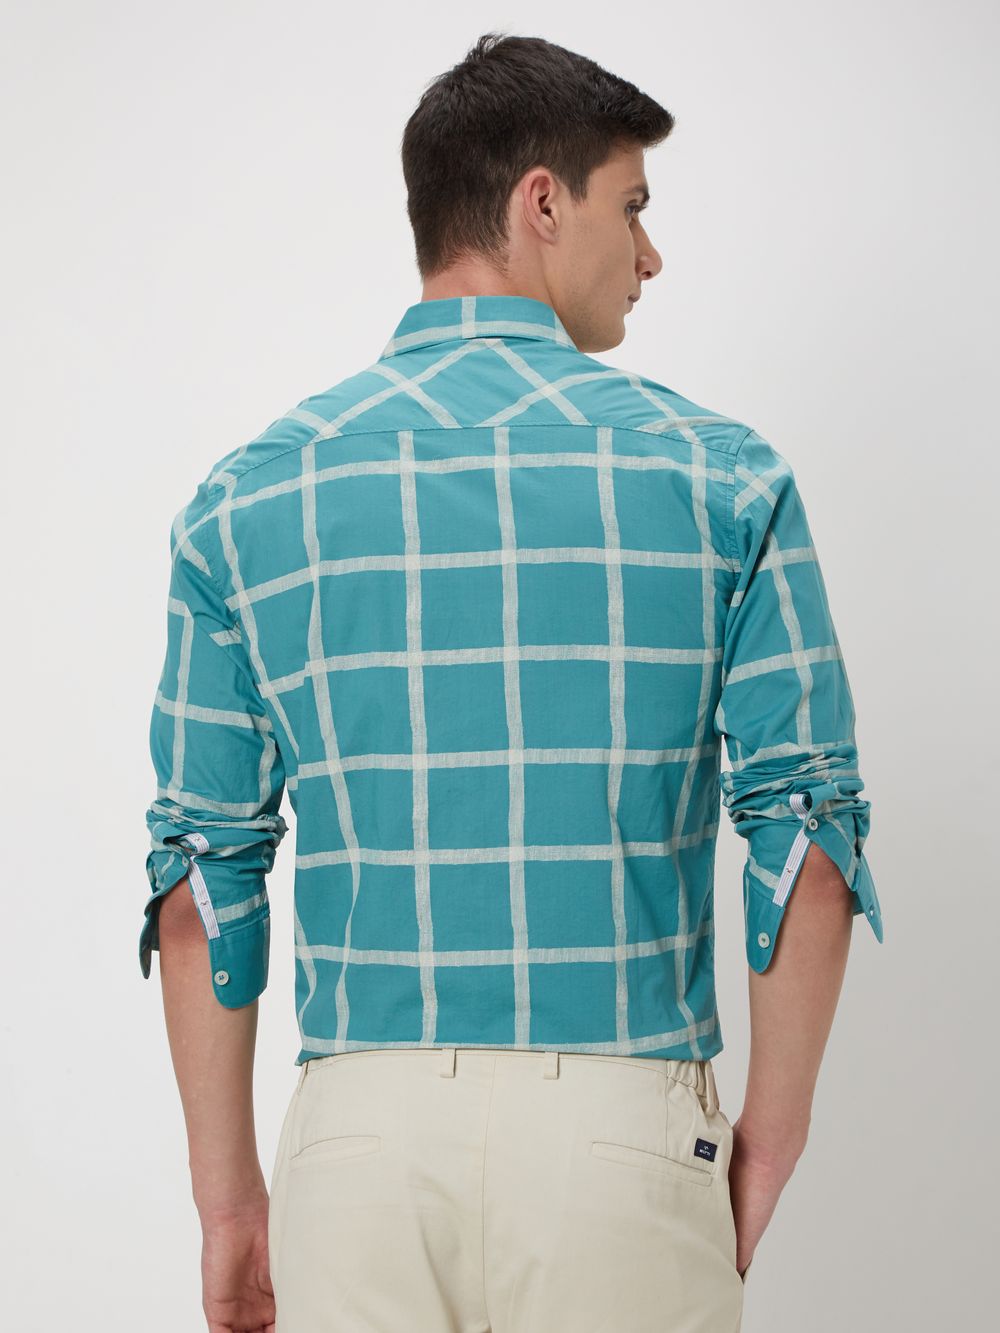 Turquoise & Off White Painted Check Lightweight Shirt